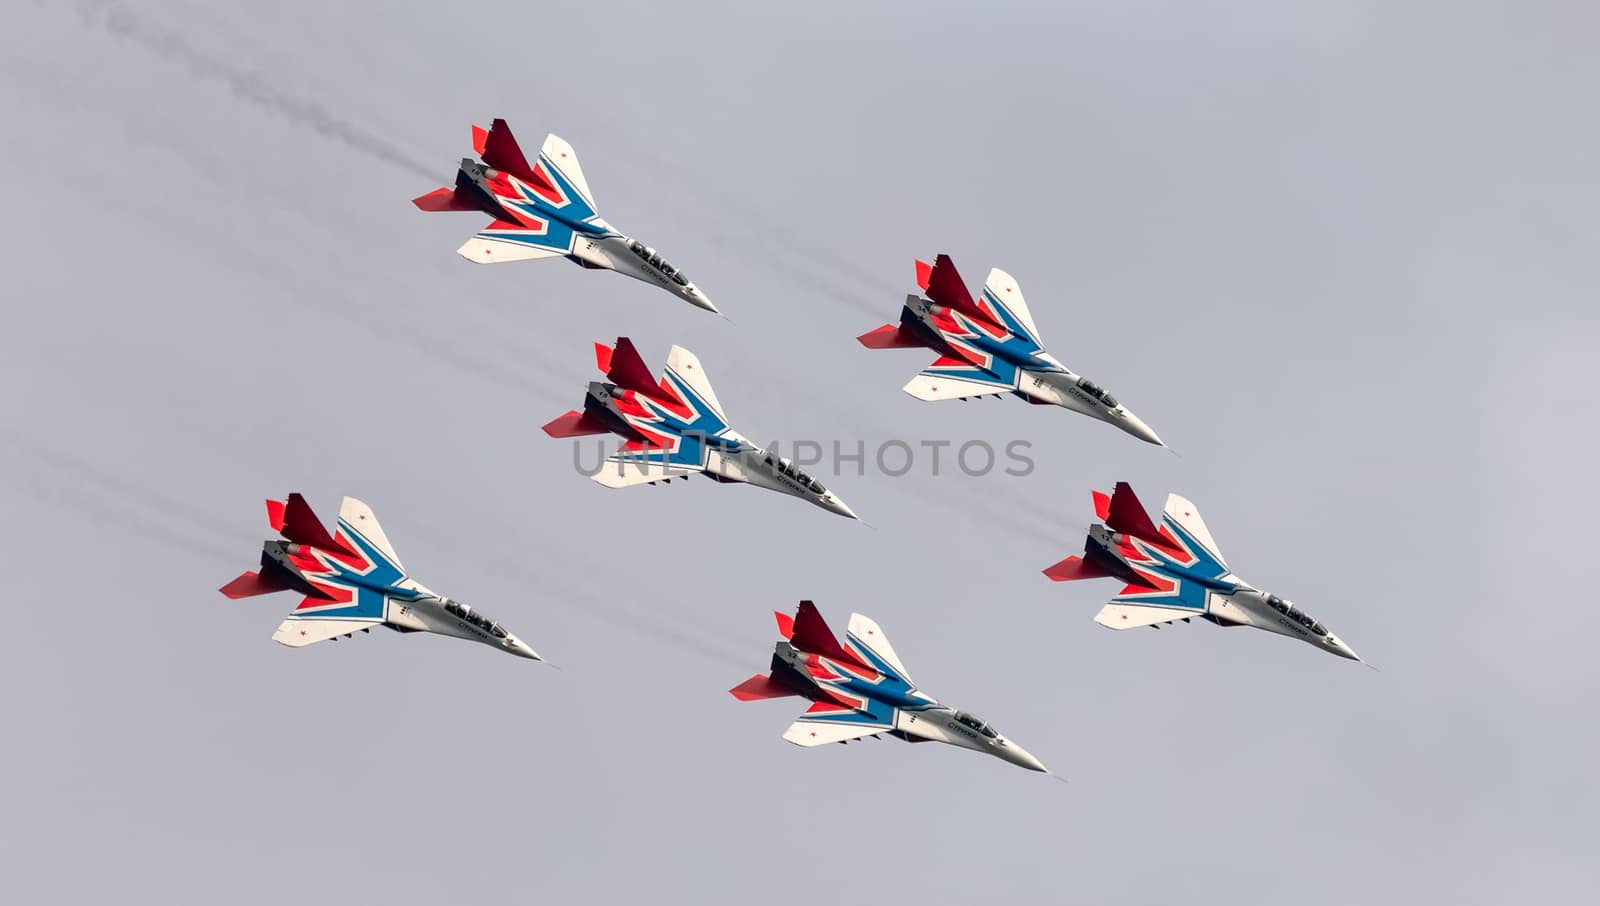 Barnaul, Russia - September 19, 2020: A shot of Strizhi MiG-29 fighter jet squadron performing stunts during an aeroshow. White cloudy sky as a background.